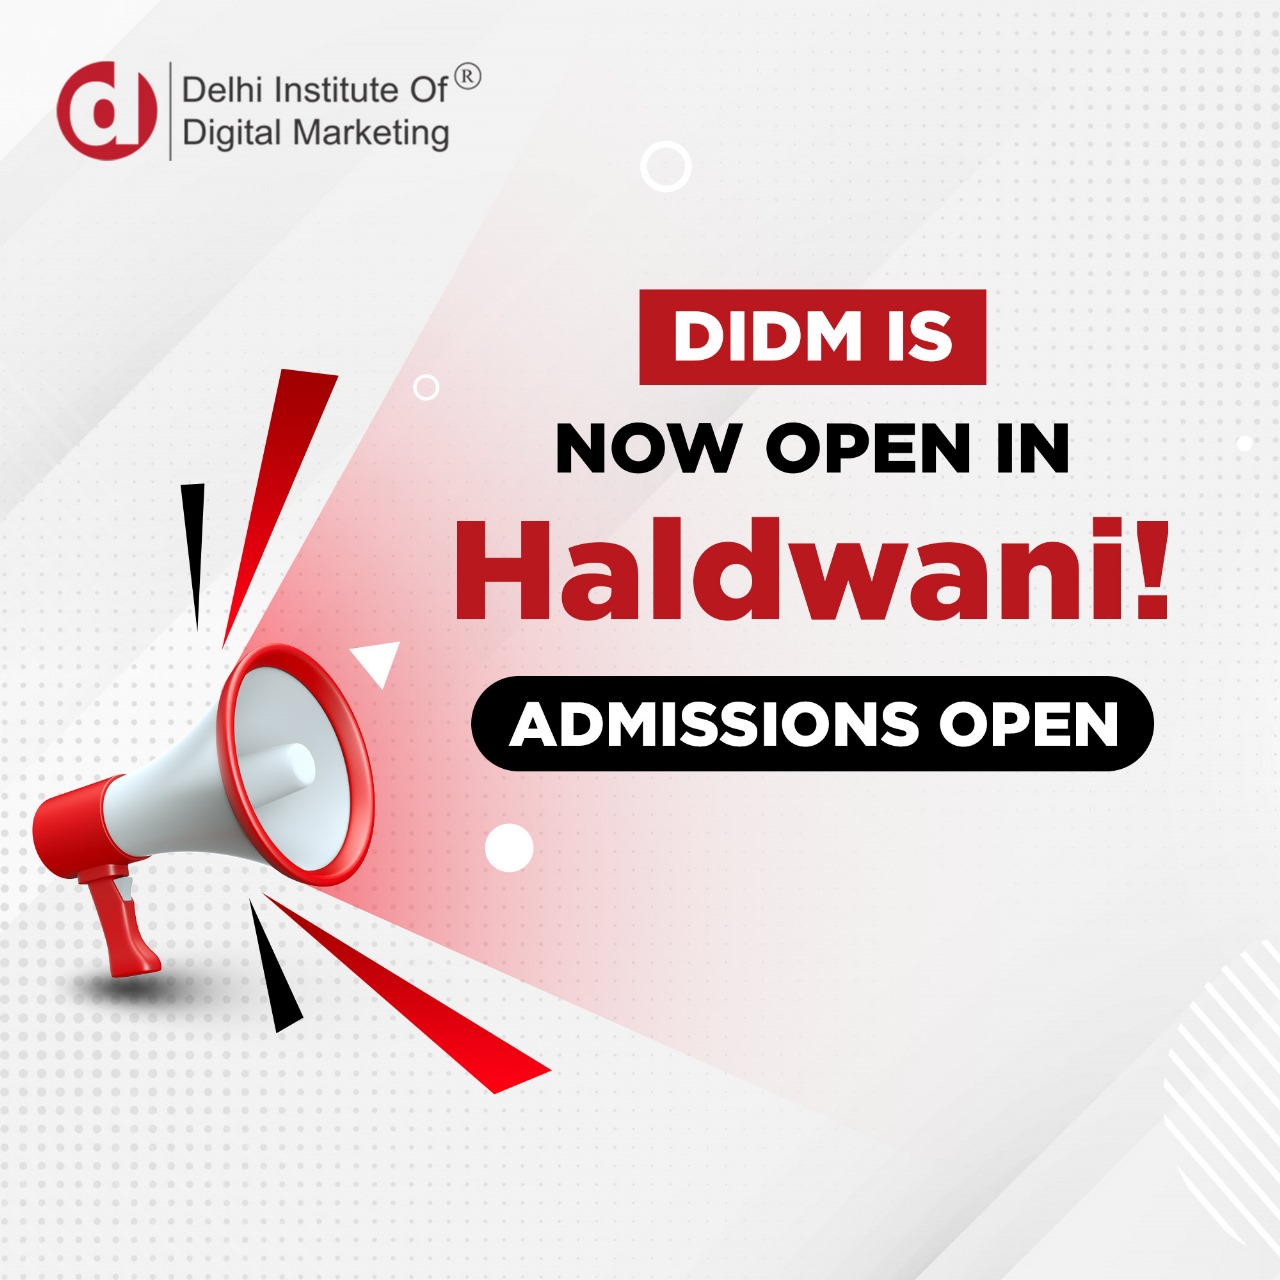 DIDM’s Launched Its New Branch in Haldwani, Uttarakhand